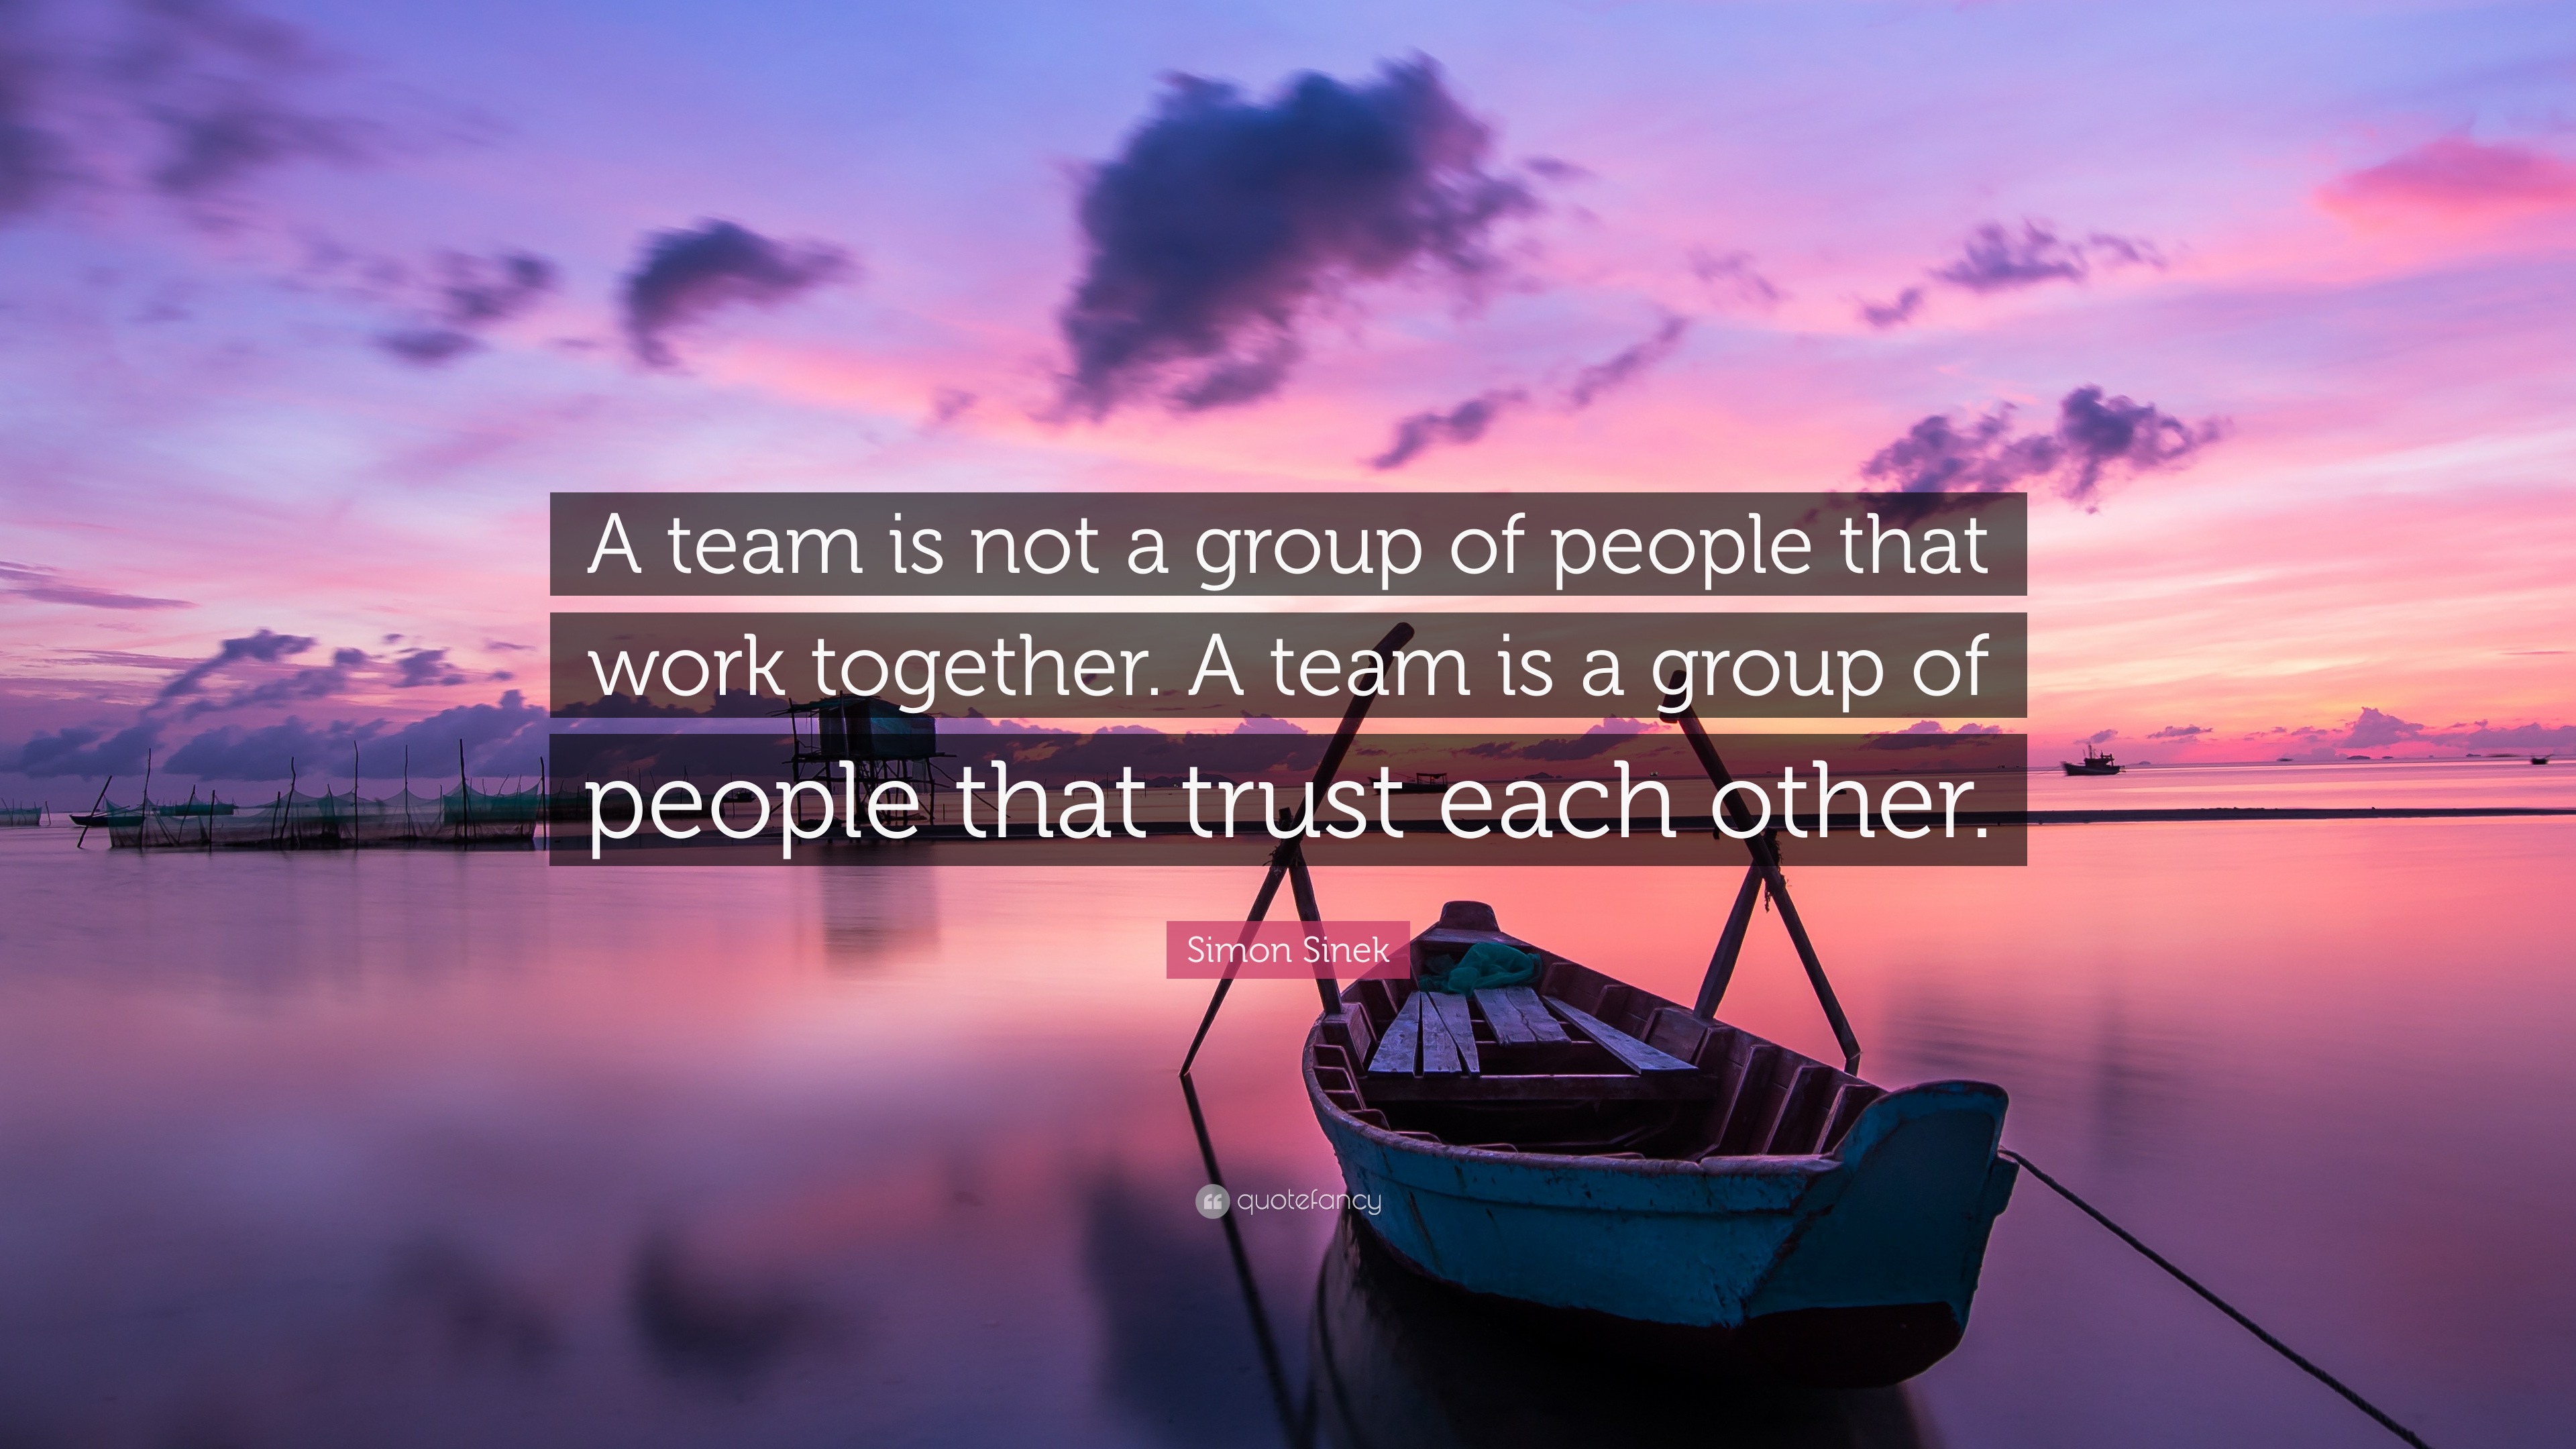 Simon Sinek Quote “A team is not a group of people that